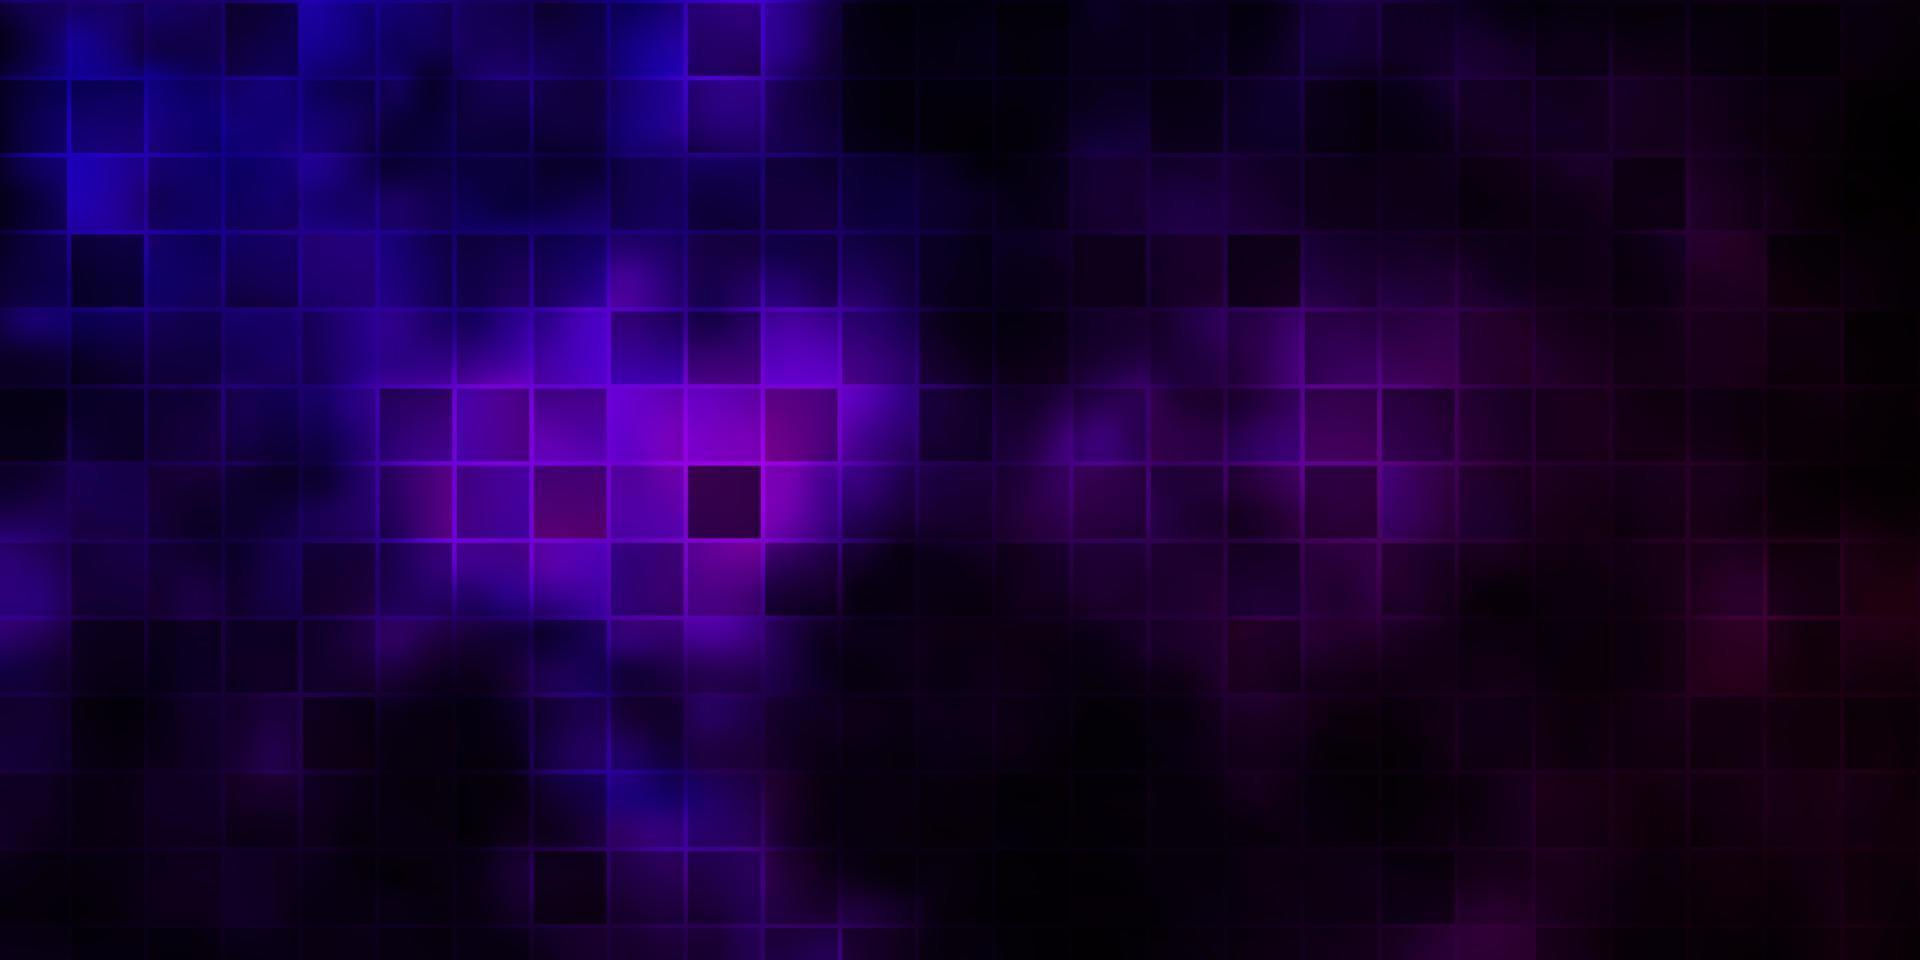 Dark Purple vector layout with lines, rectangles.